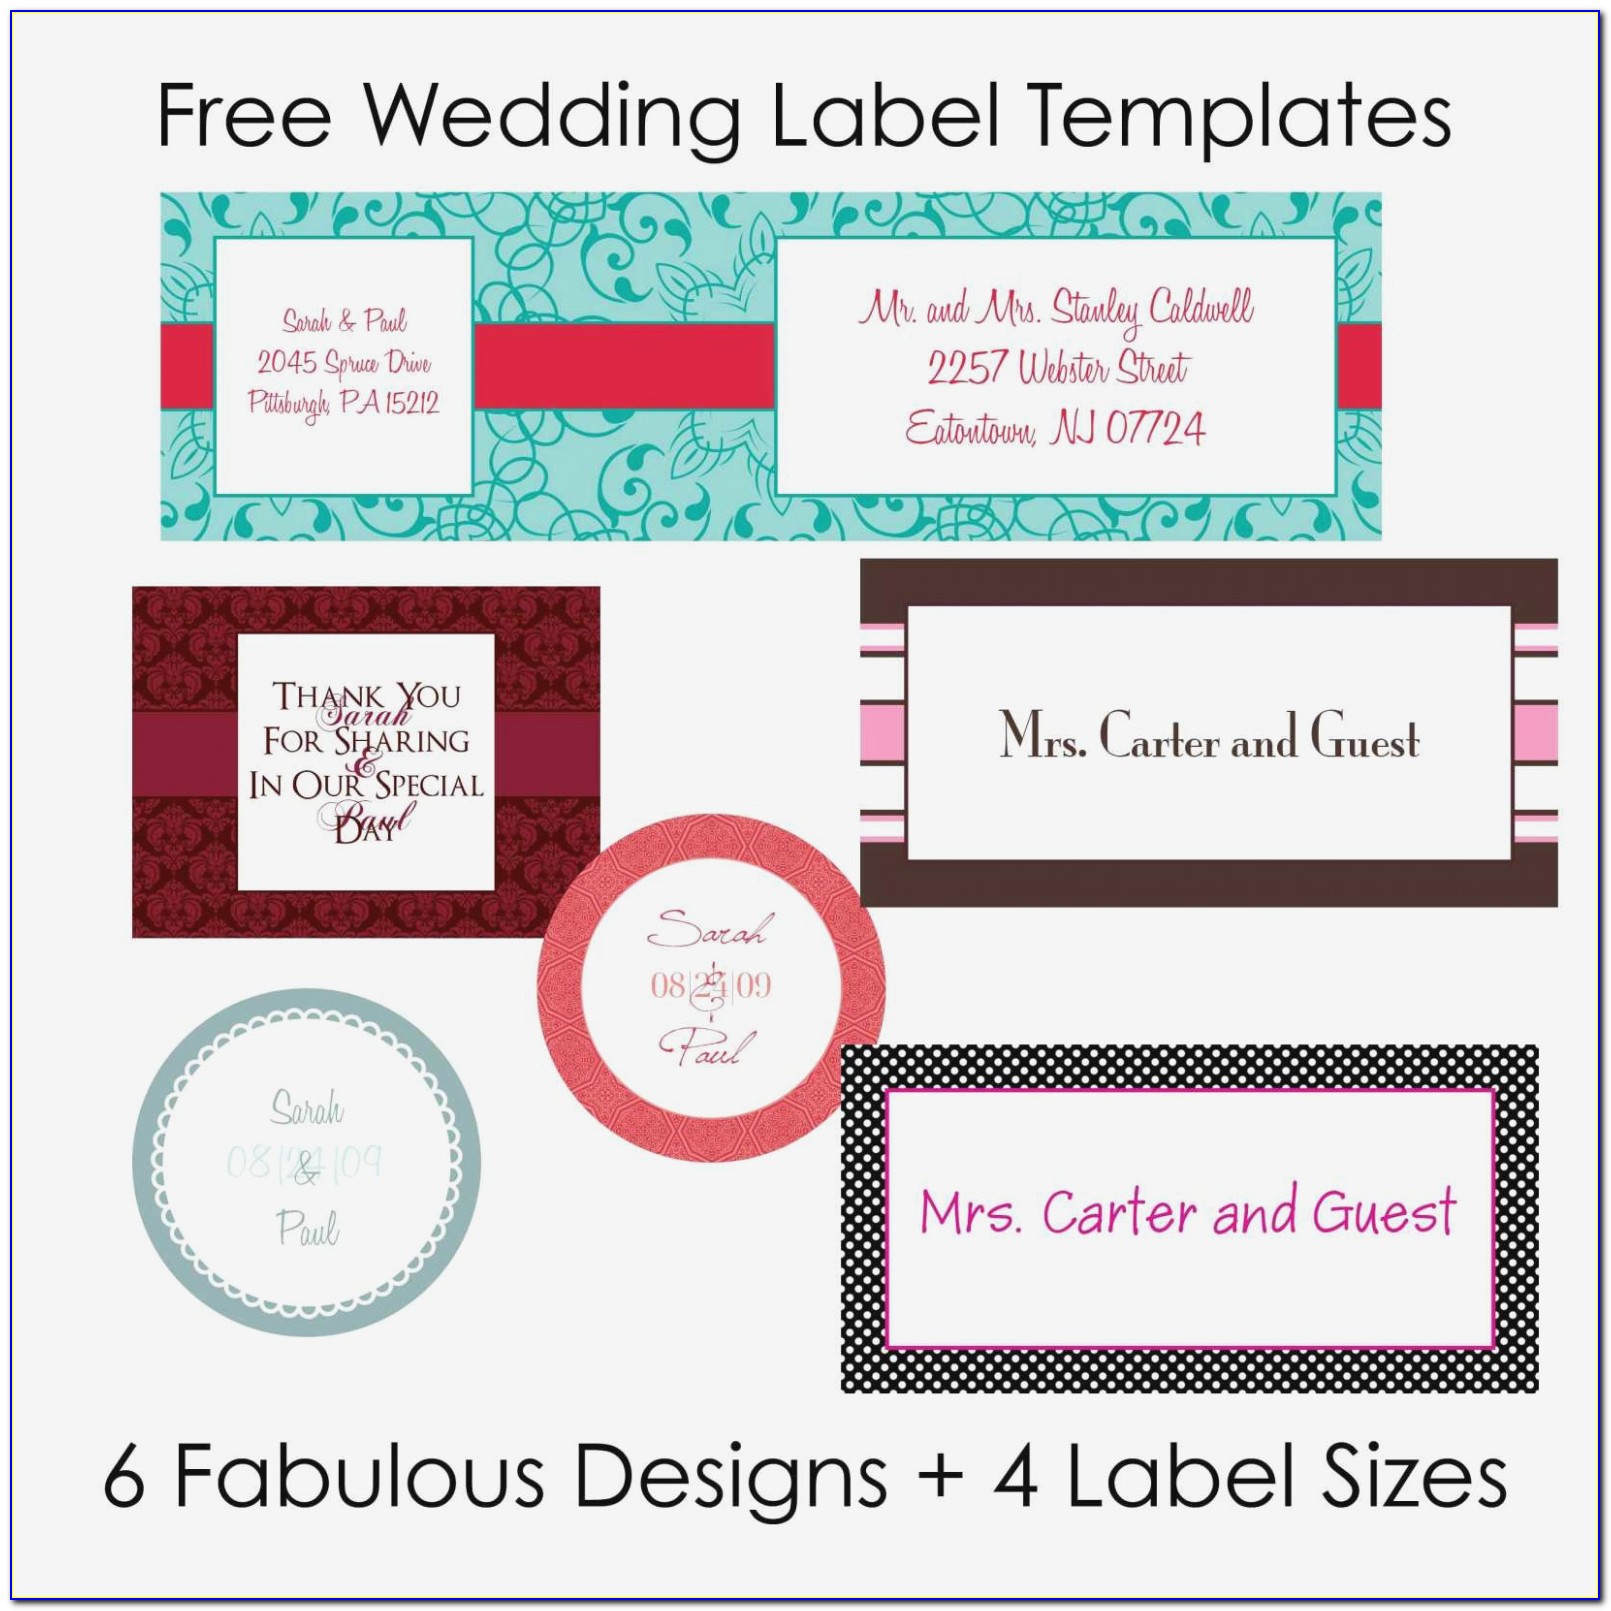 Template For Labels 30 Per Sheet